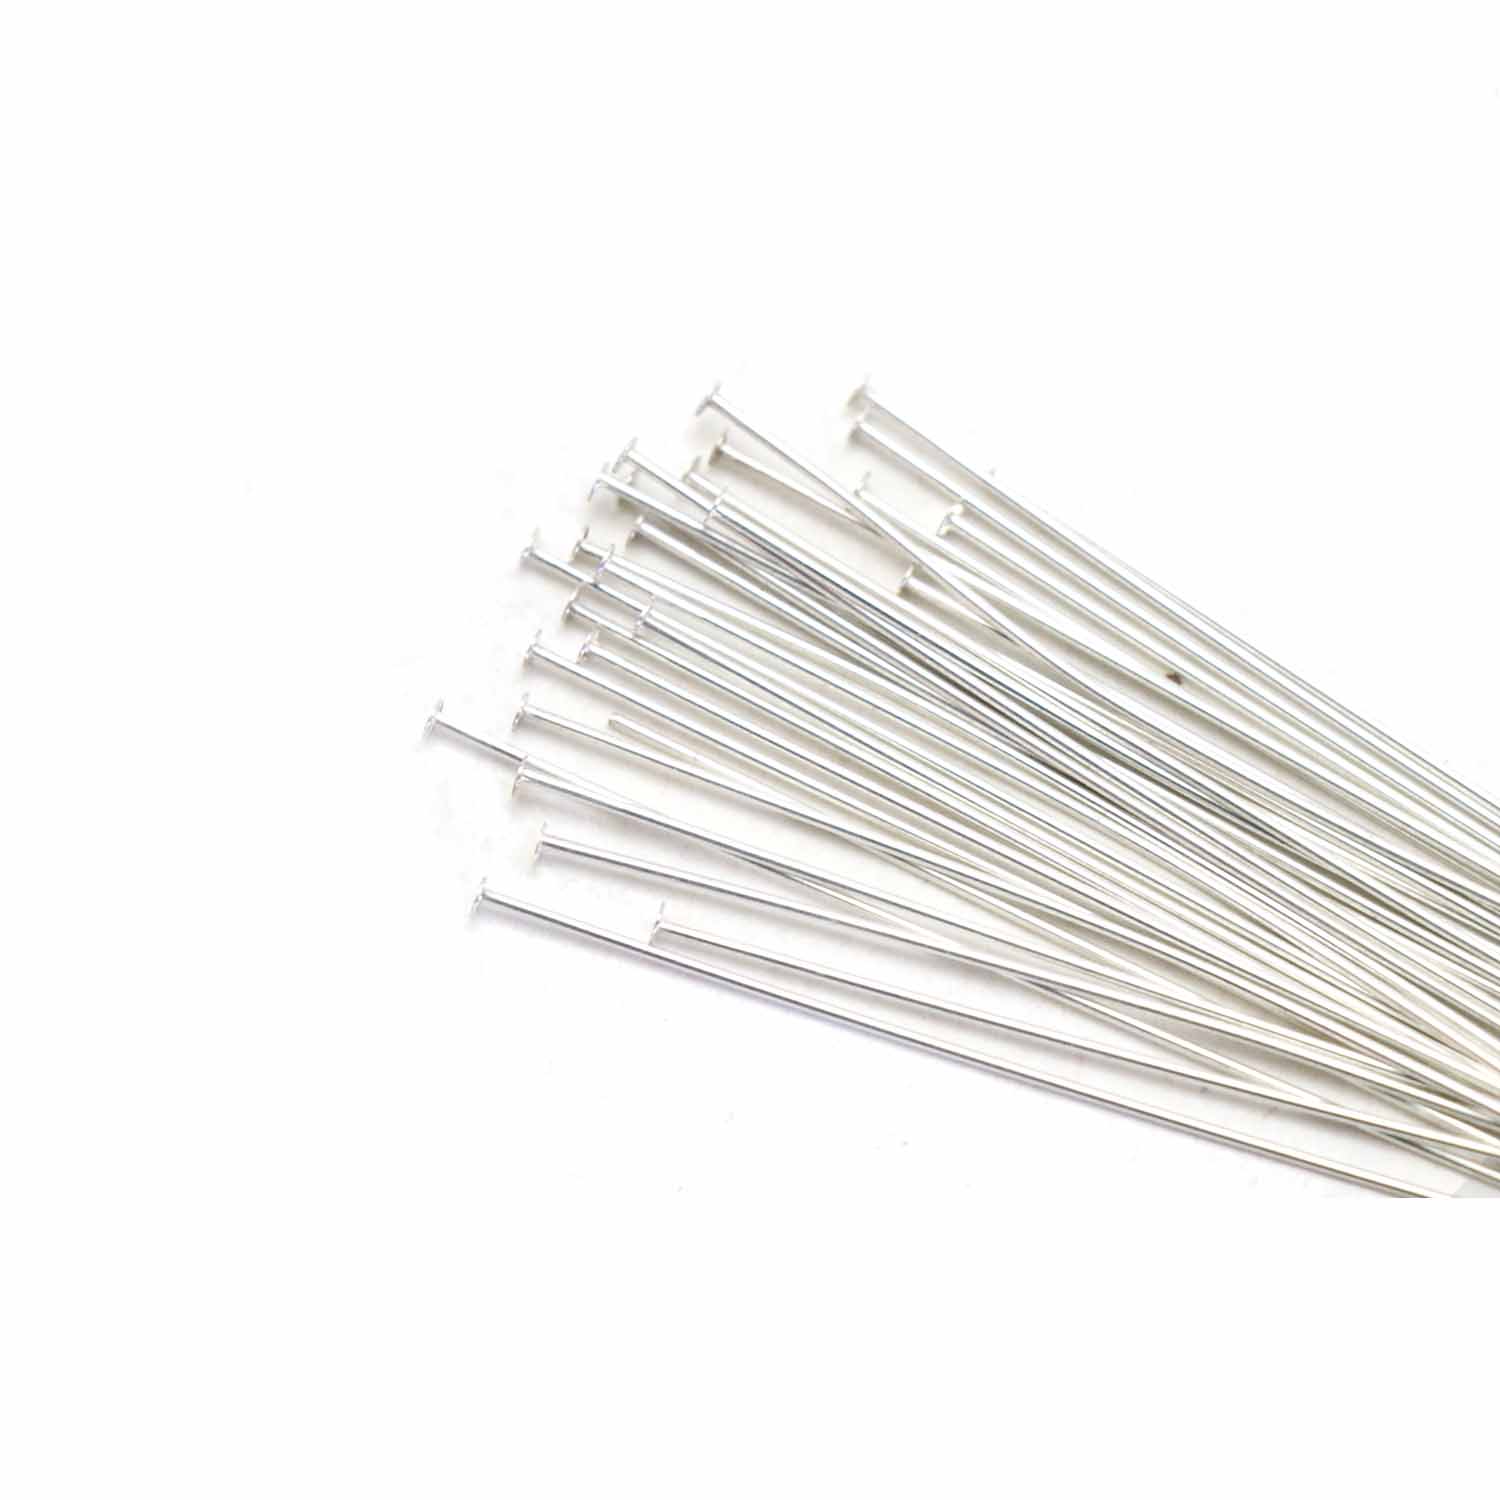 75 Head Pins Sterling Silver Jewelry Bead Part 1" 